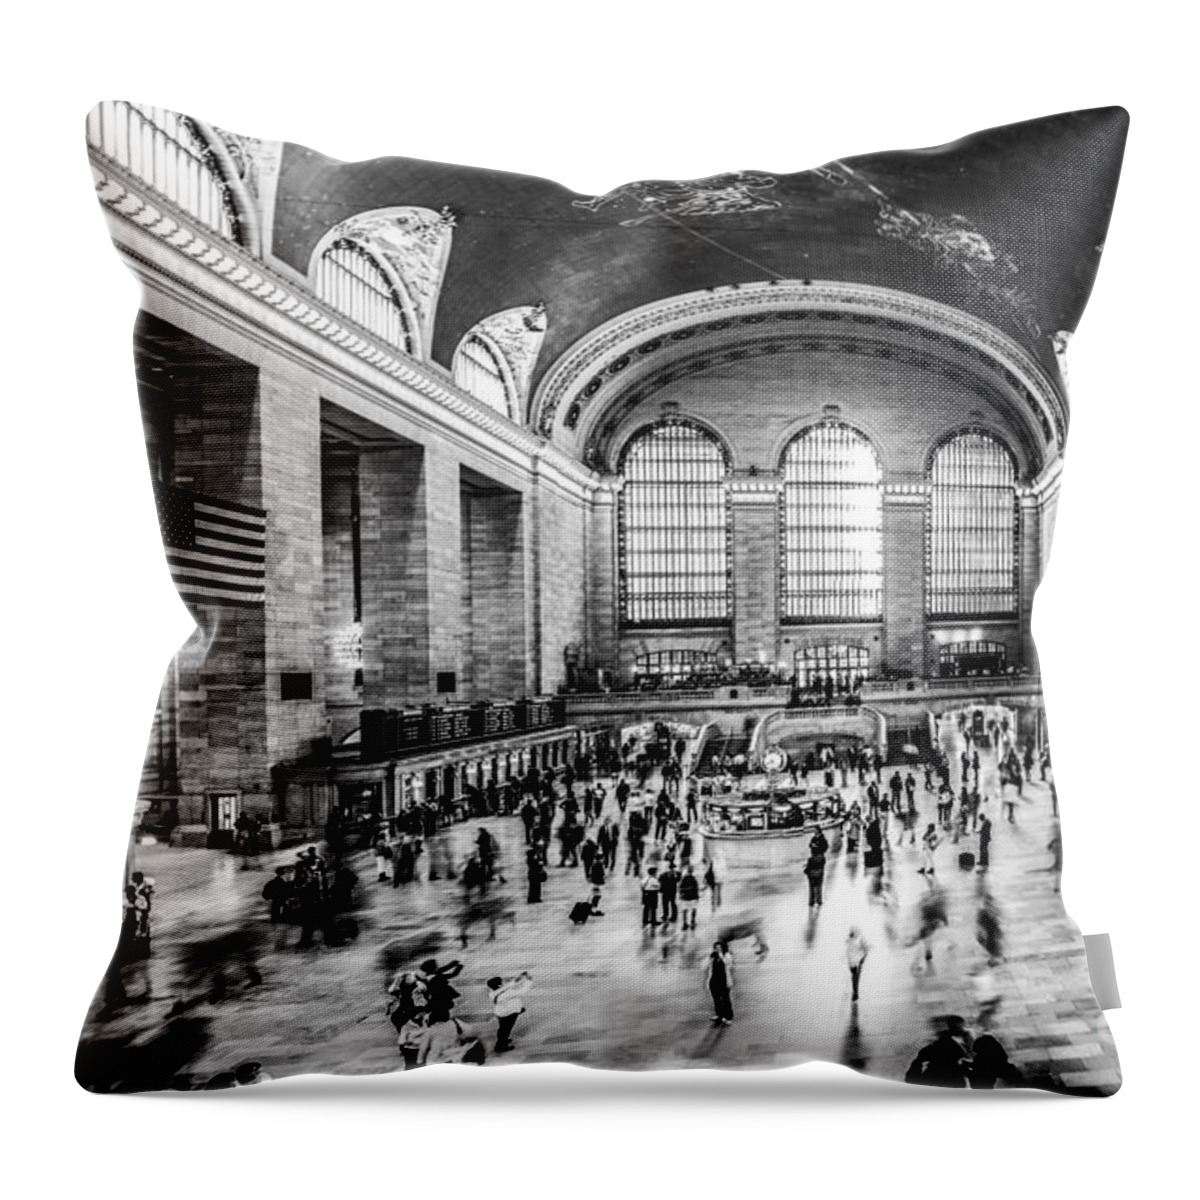 Nyc Throw Pillow featuring the photograph Grand Central Station -pano bw by Hannes Cmarits